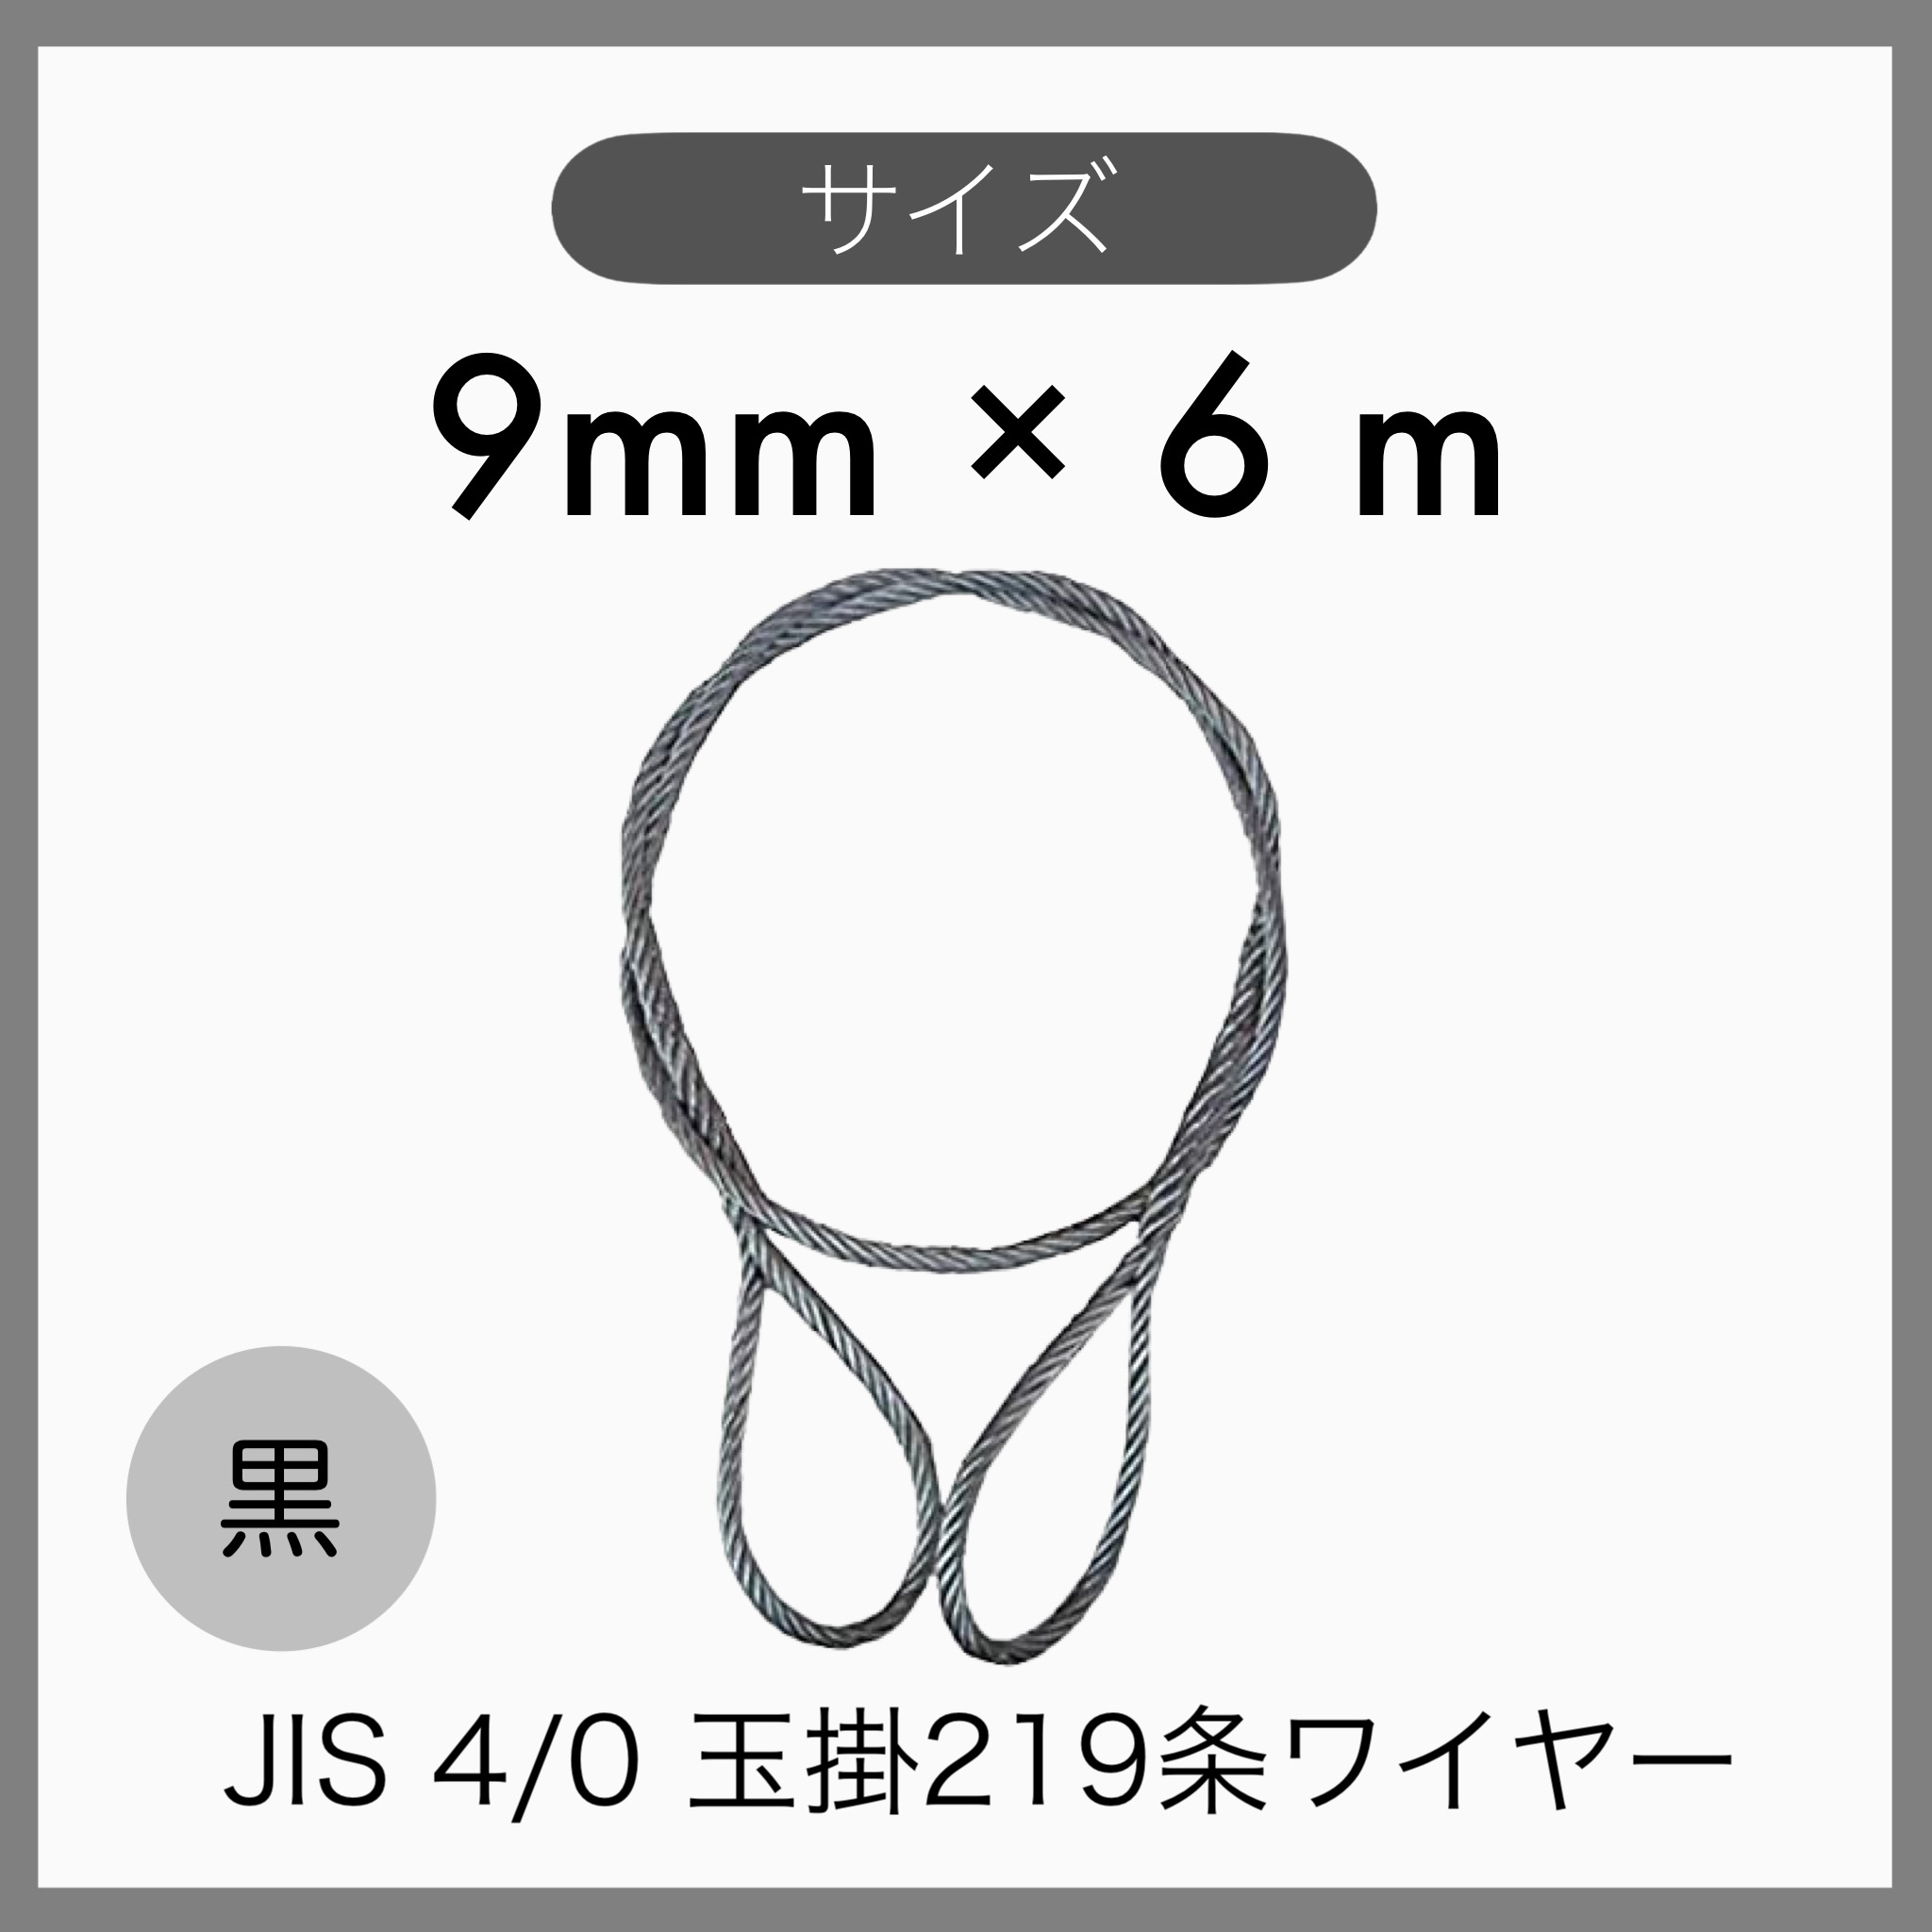 10 pcs set JIS O/O black sphere .. wire sphere ..219 article wire knitting imported goods 9mm×6m